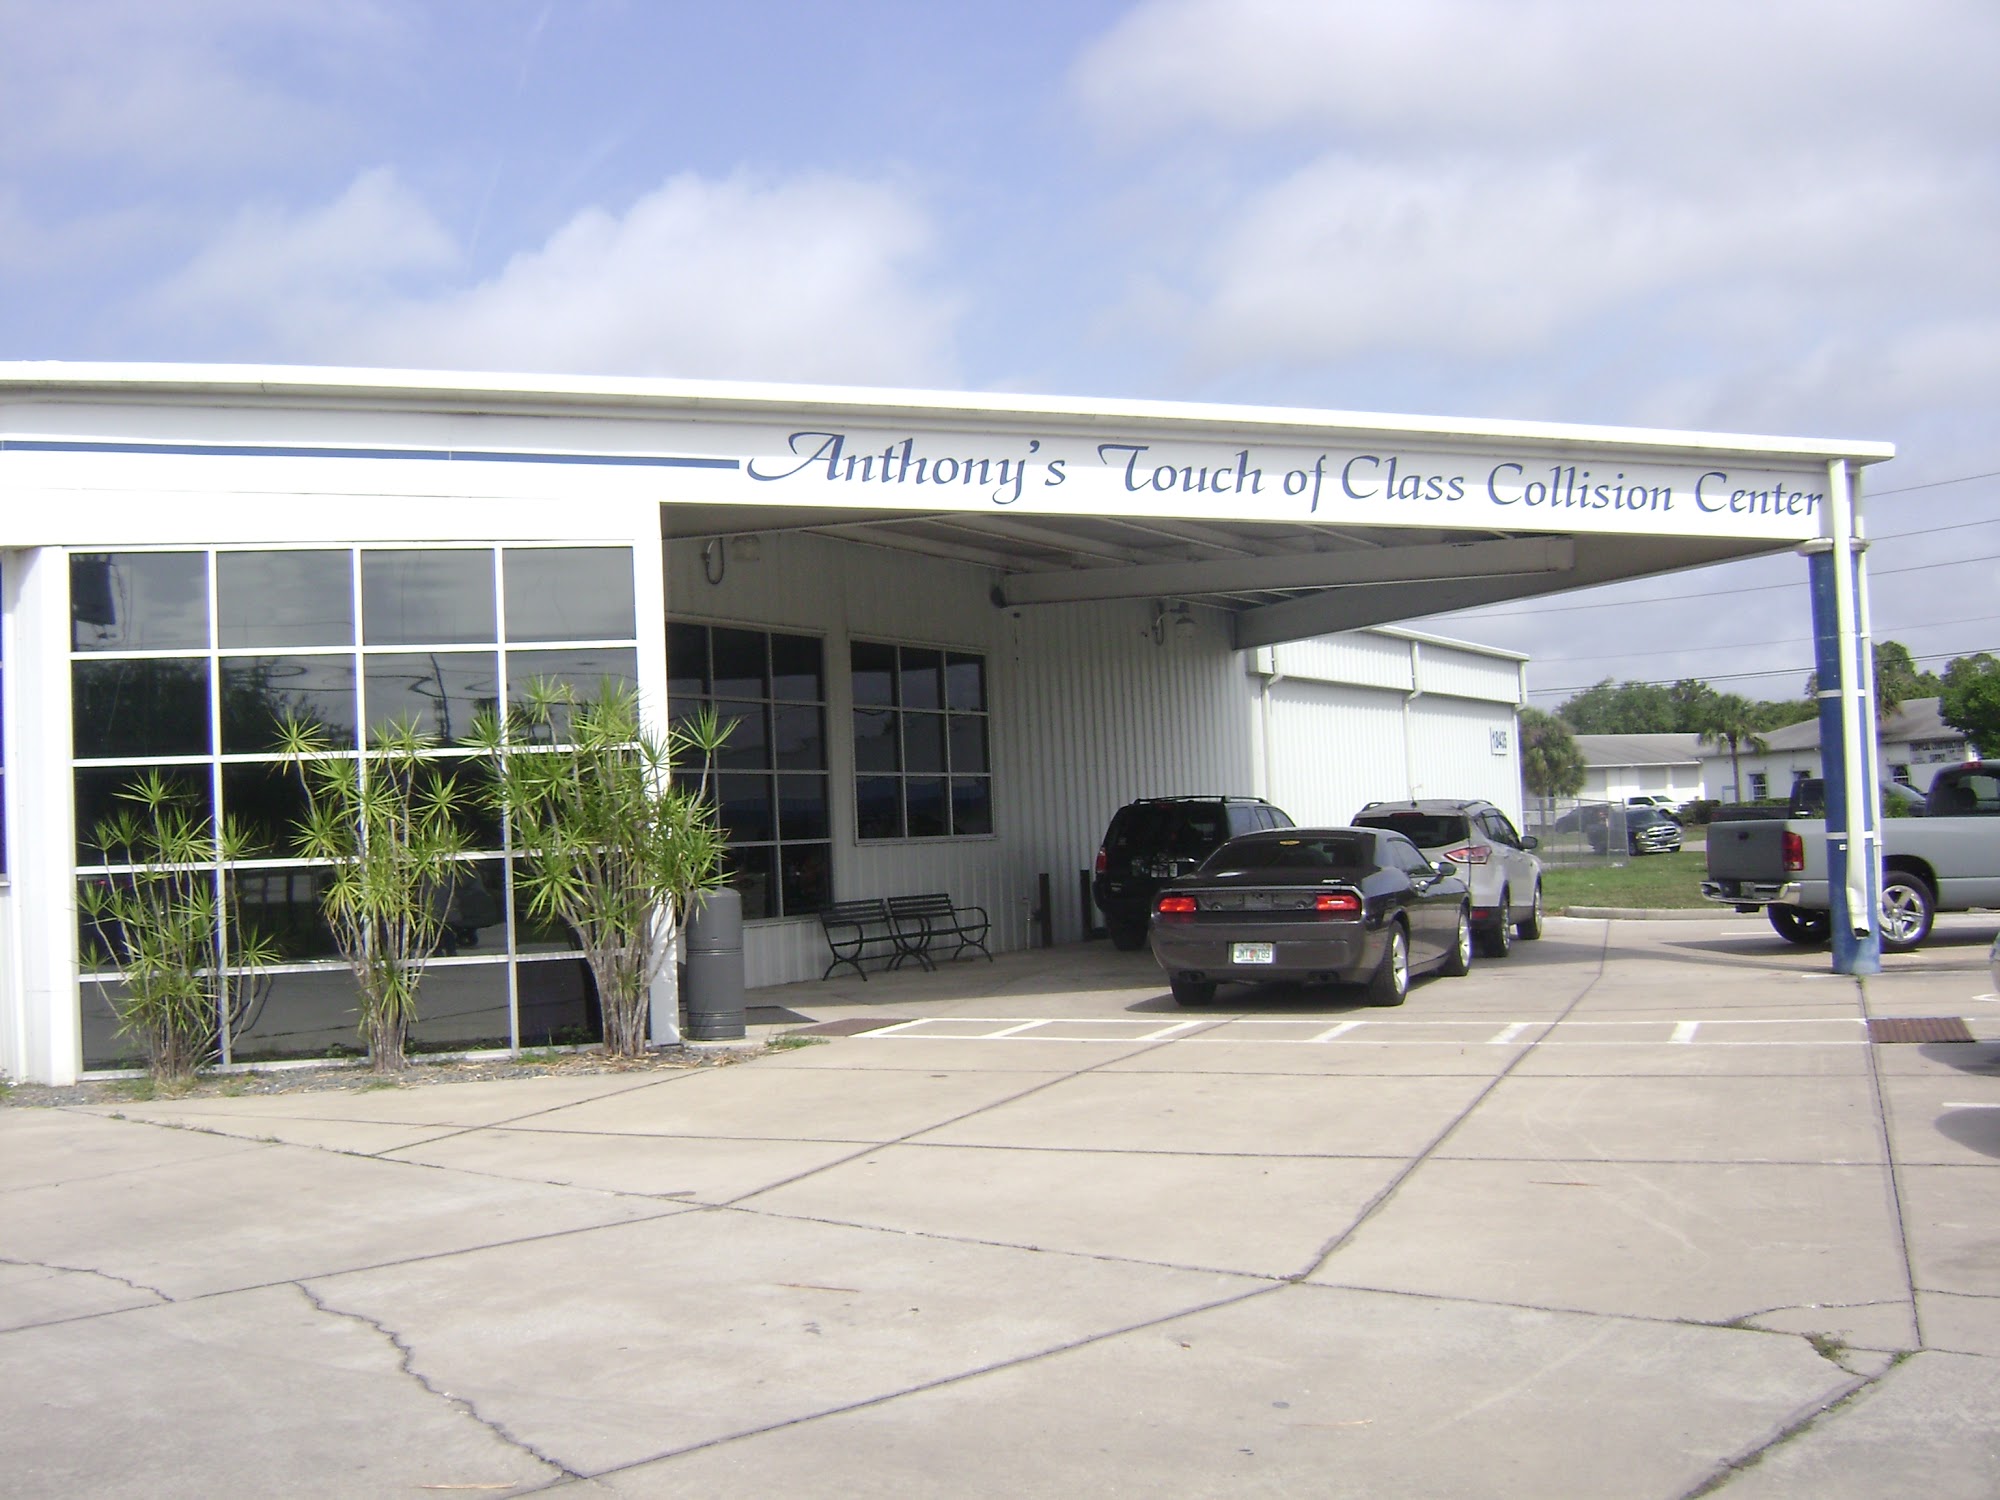 Anthony's Touch of Class Collision Center